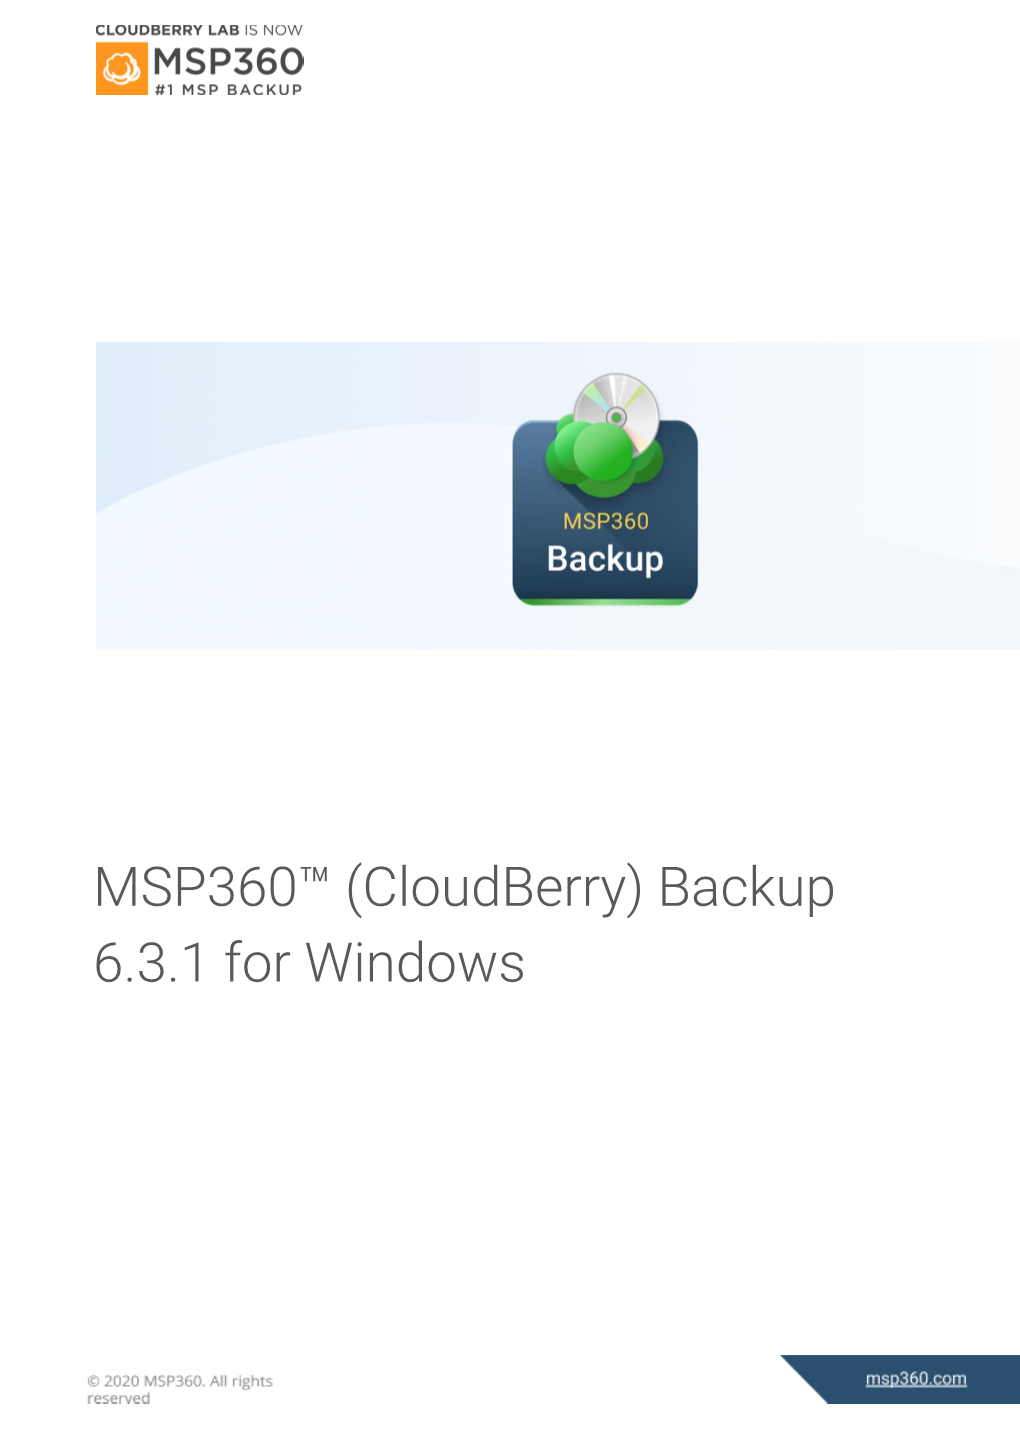 MSP360™ (Cloudberry) Backup 6.3.1 for Windows